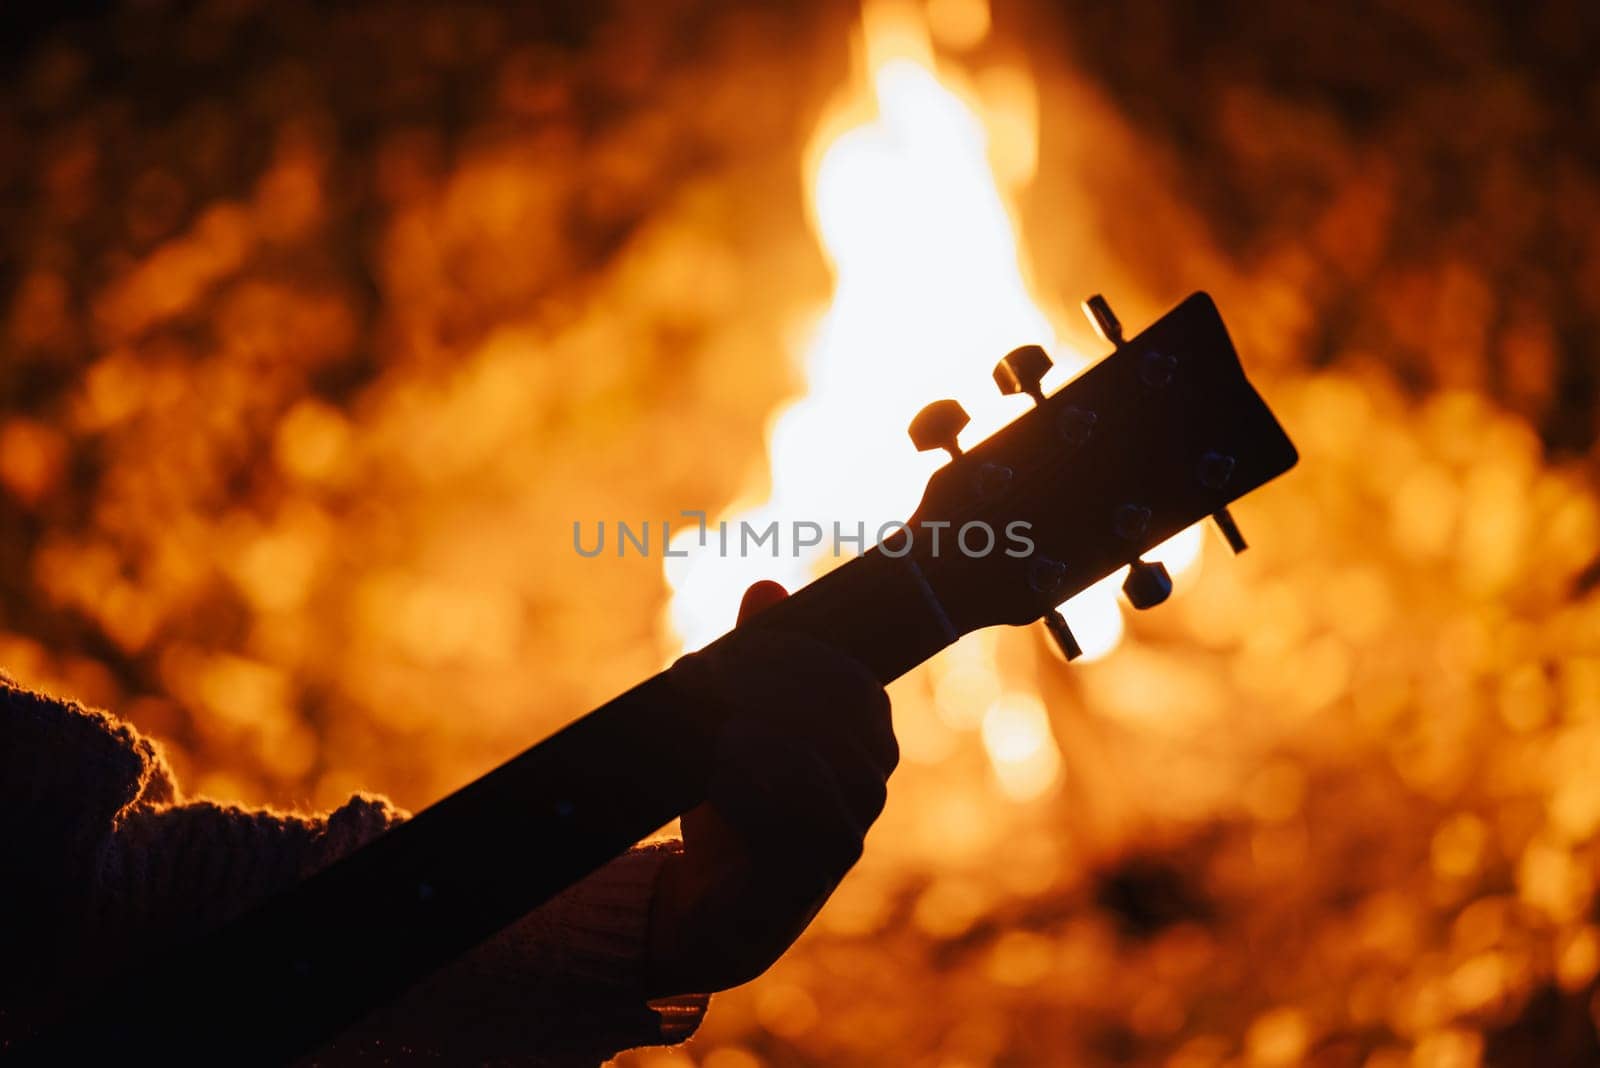 Spending time with friends near bonfire, play the guitar